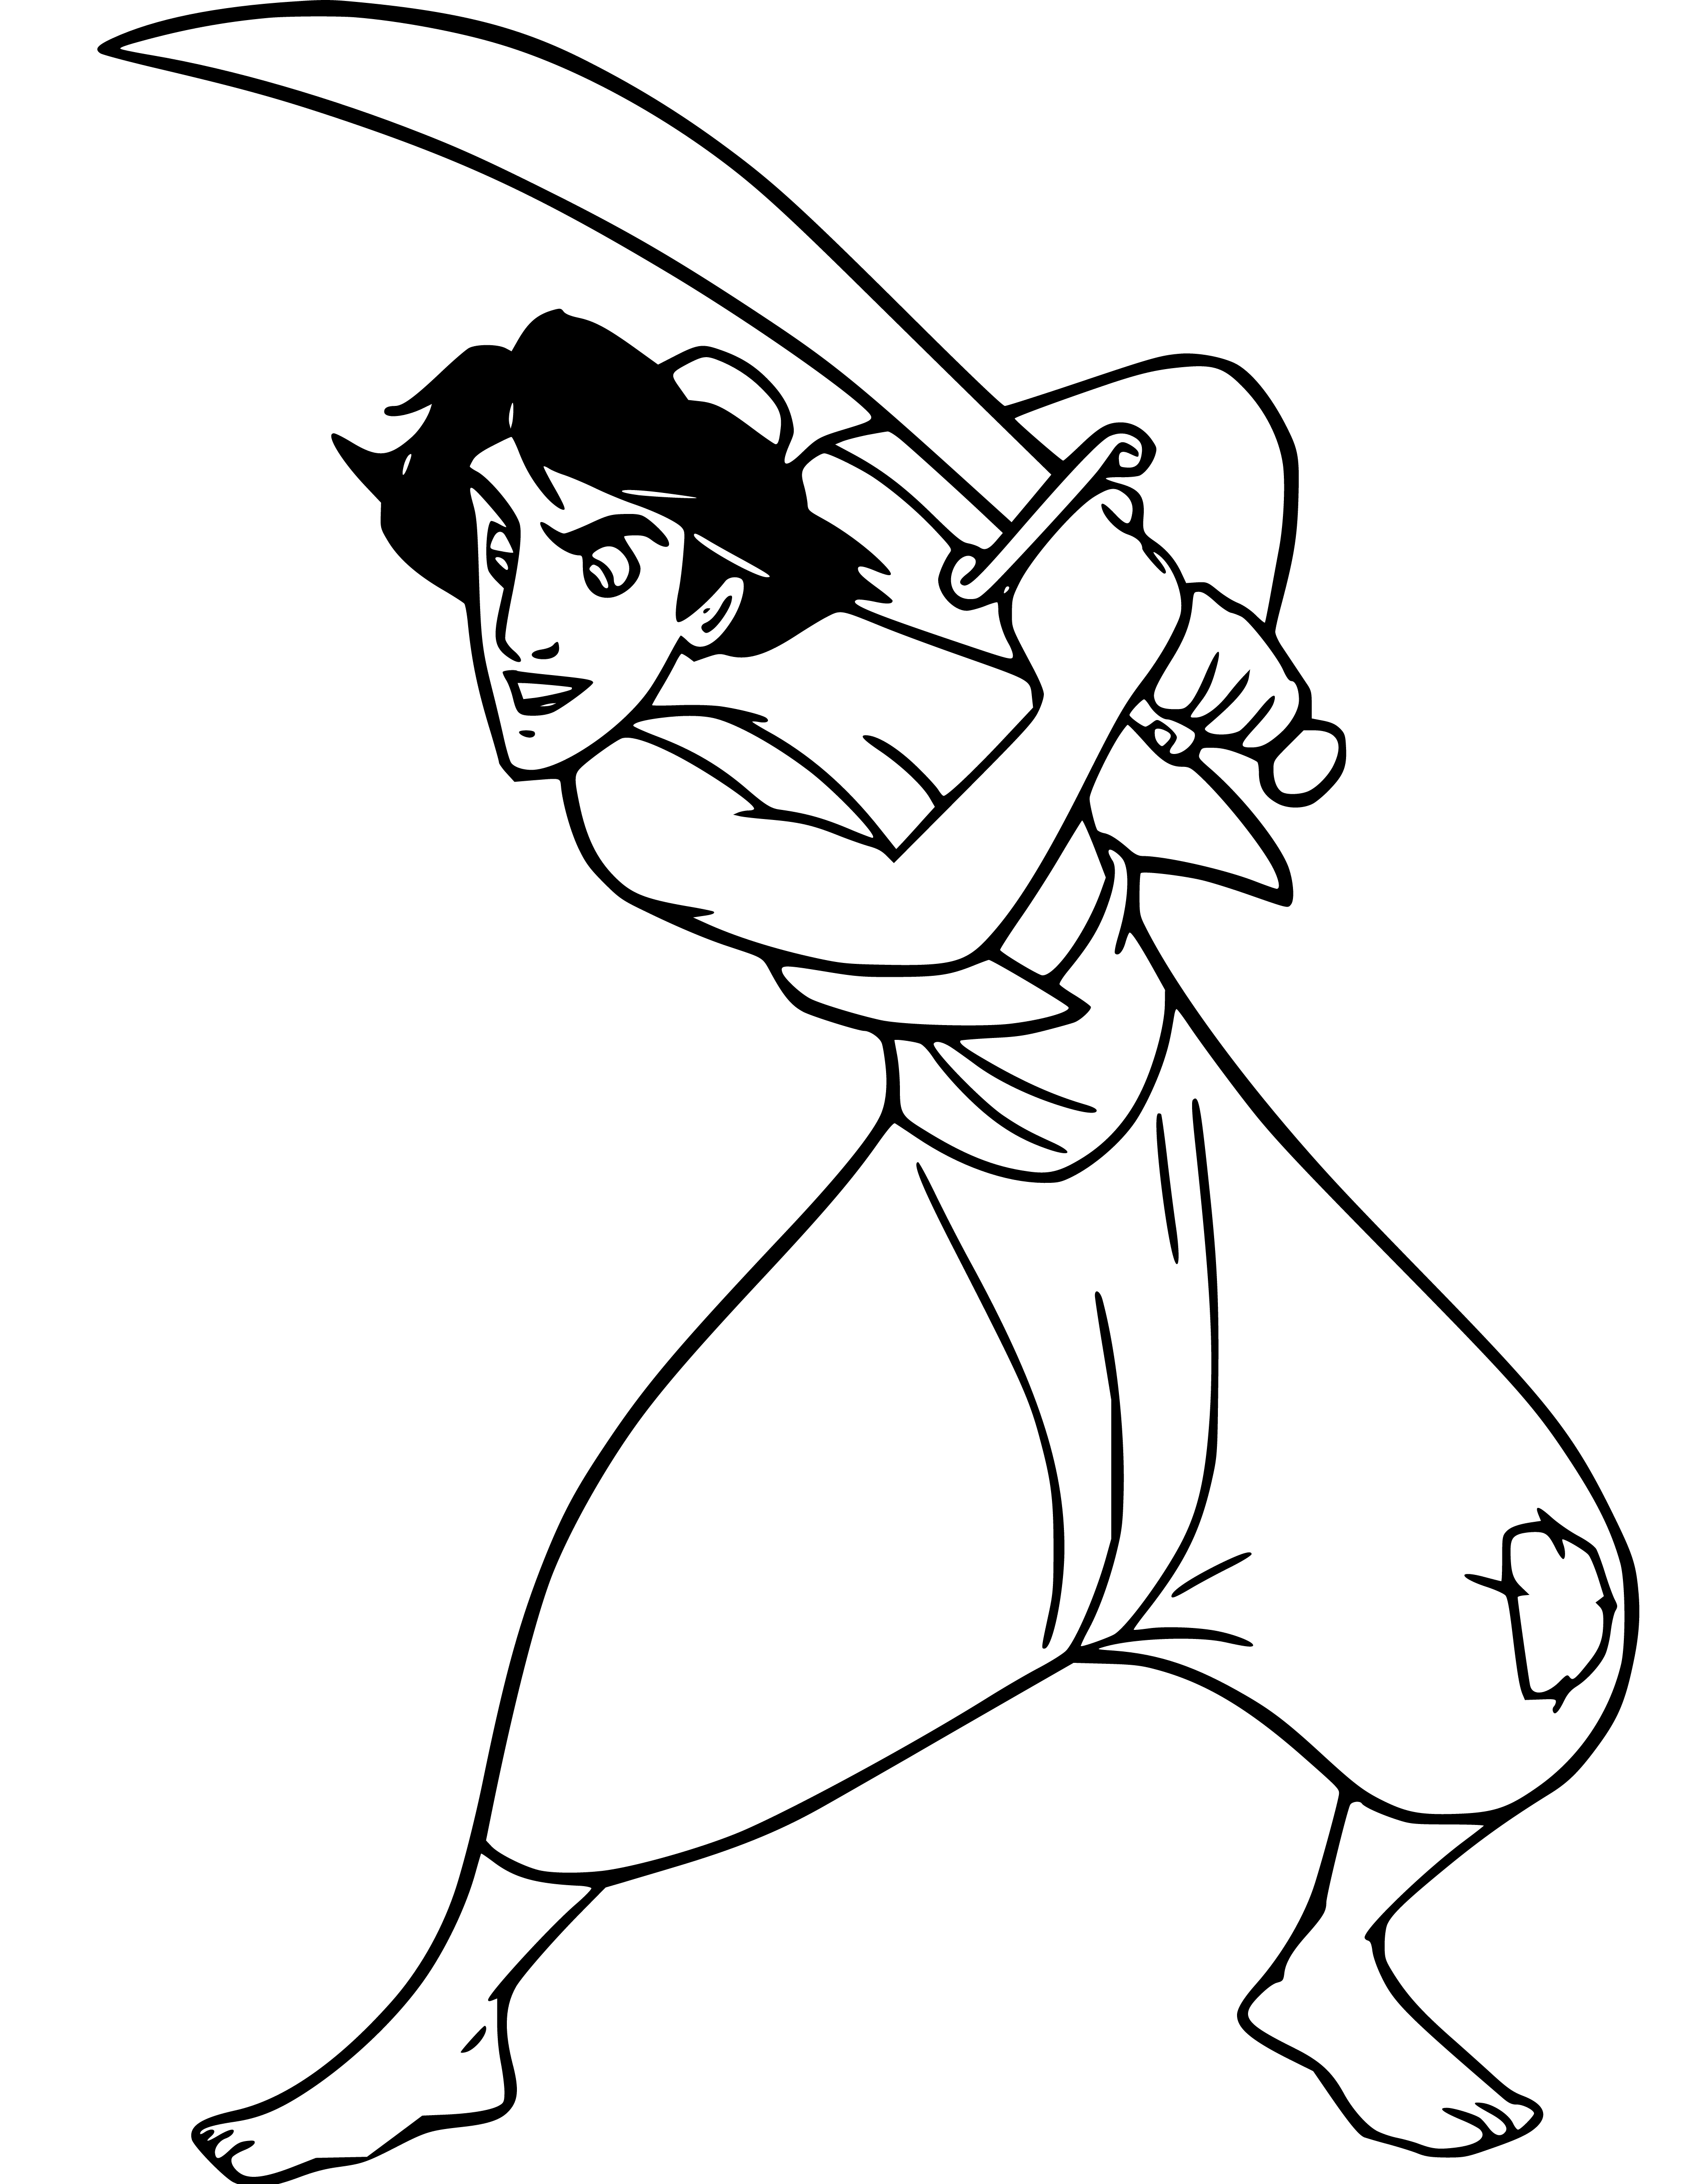 Aladdin holding a sword for painting Coloring Page Printable for Kids, Free, Simple and Easy, as PDF